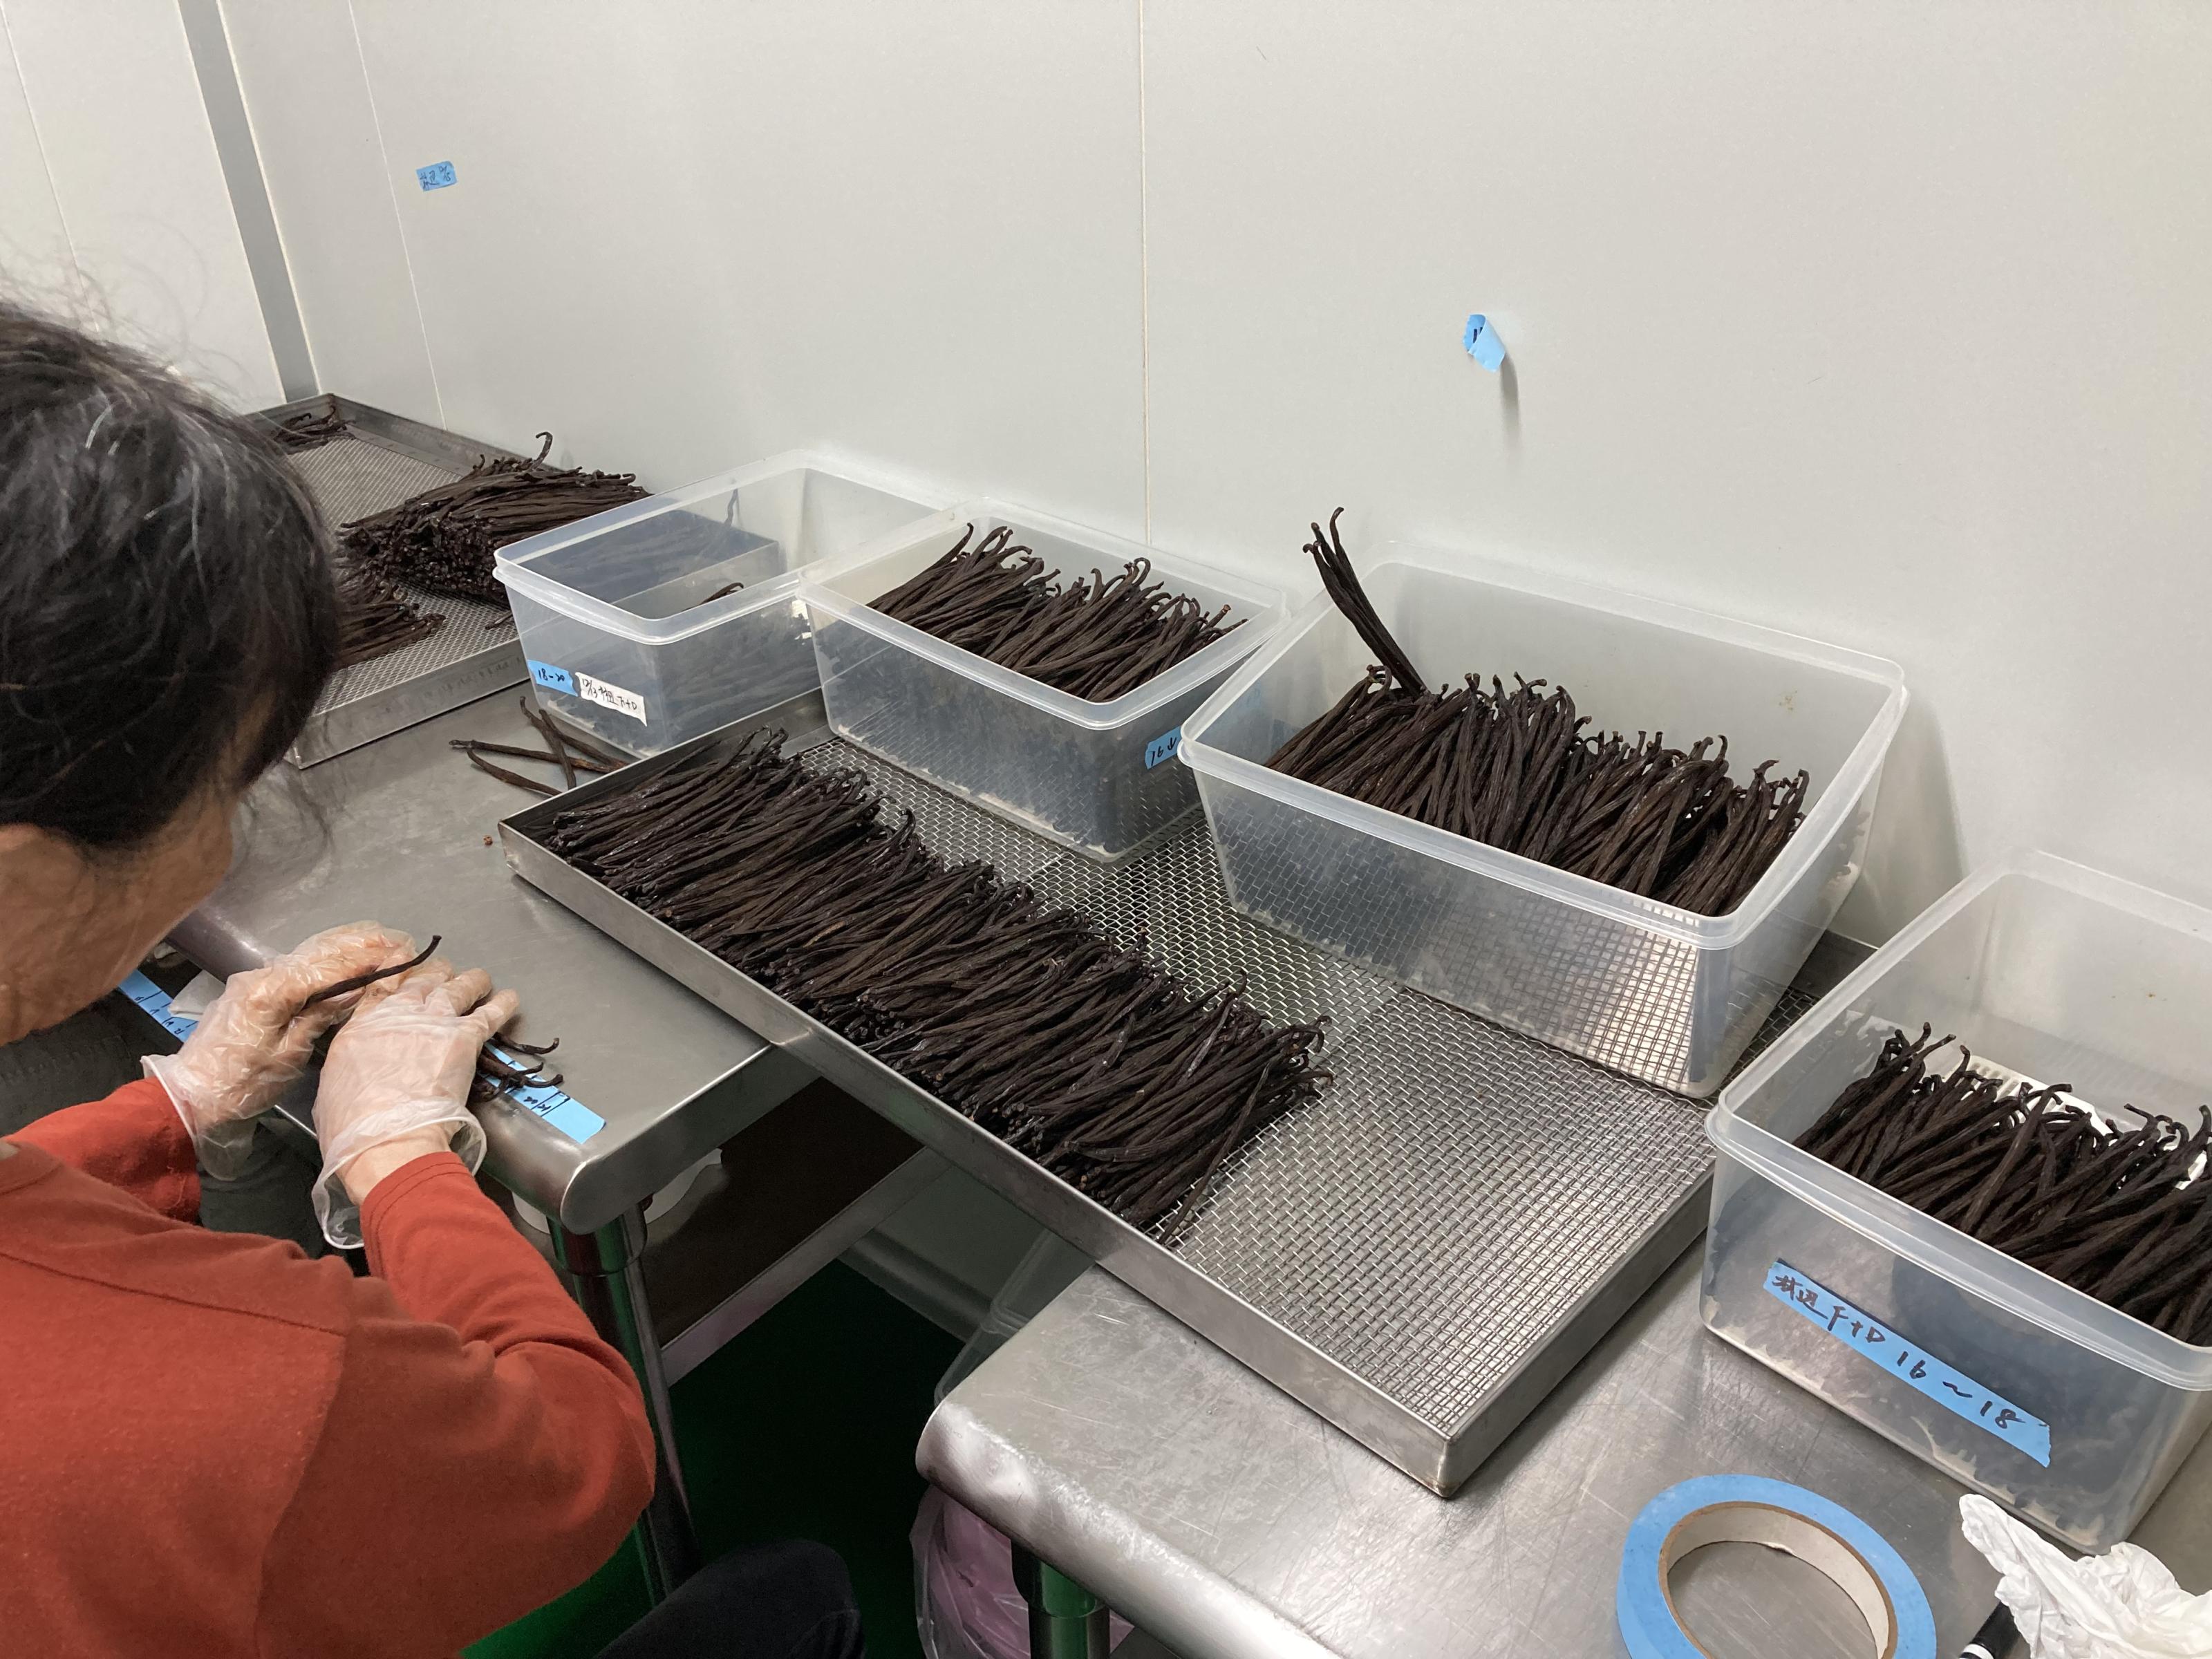 Fig. 3. Processed vanilla pods are selected and sorted after processing.